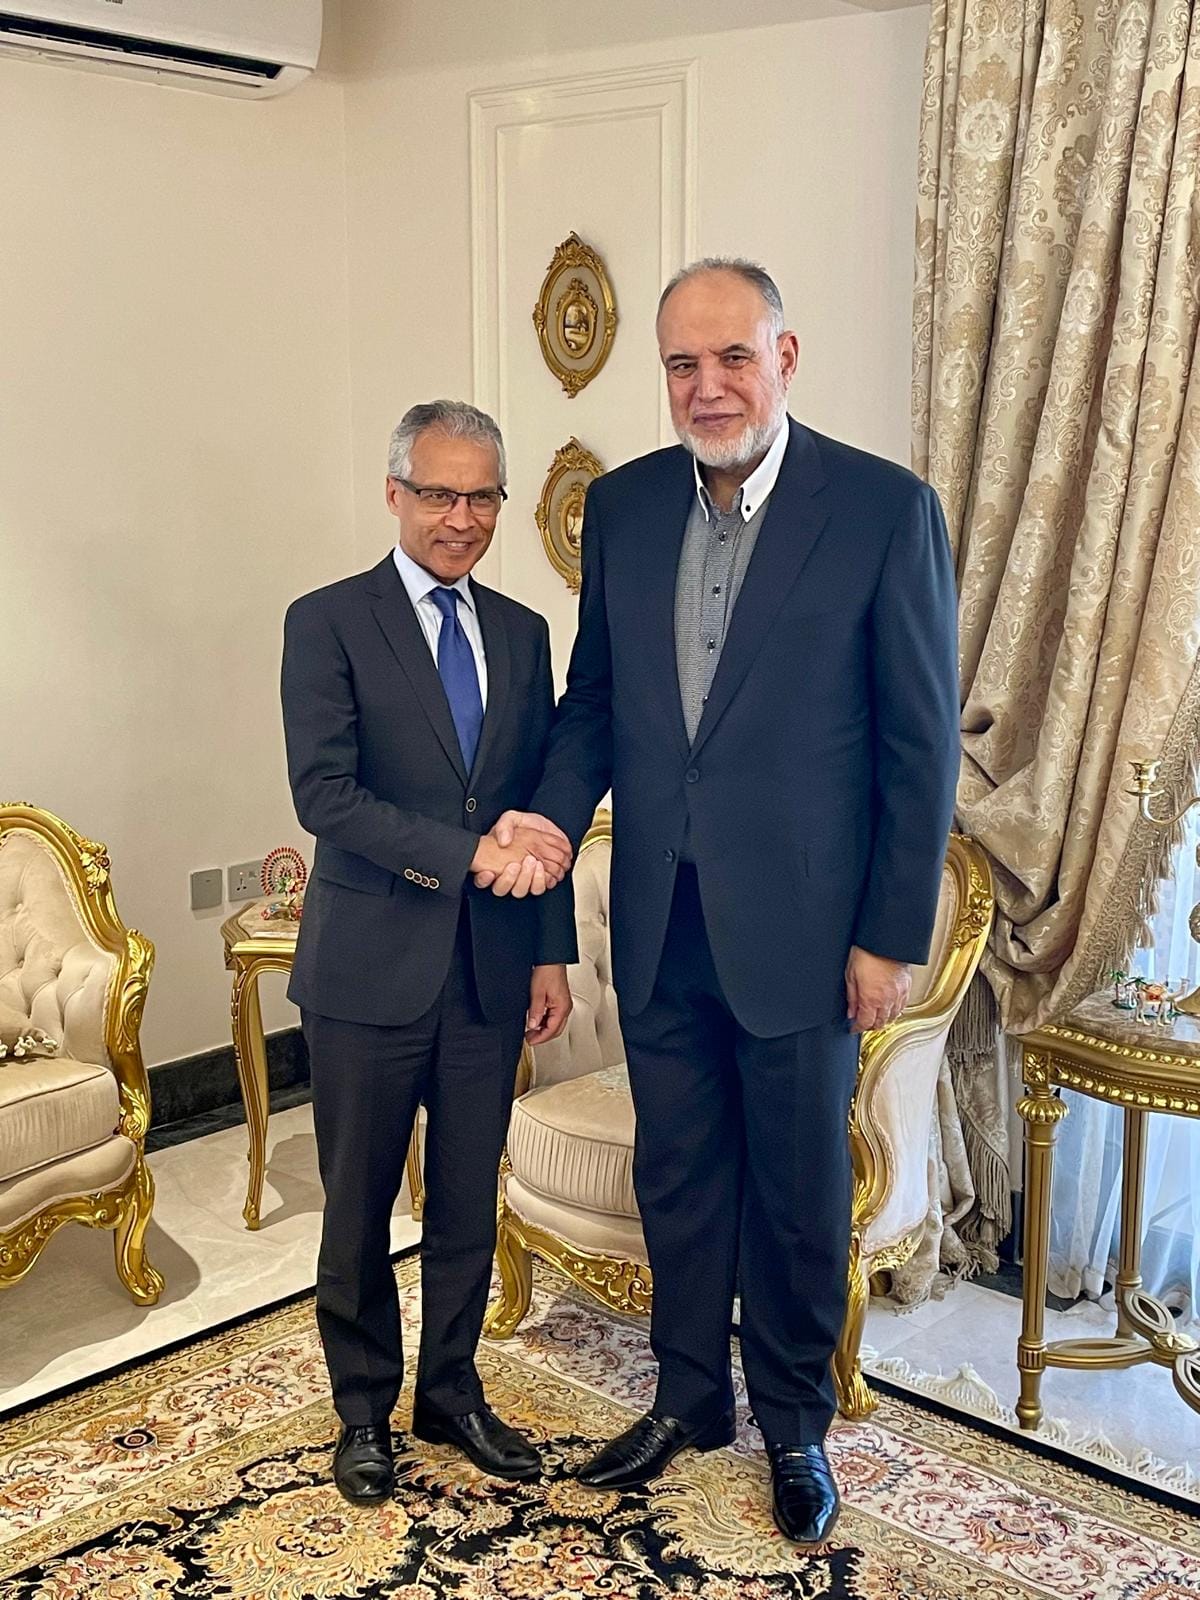 Libyan National Security Advisor meets with the French Ambassador.